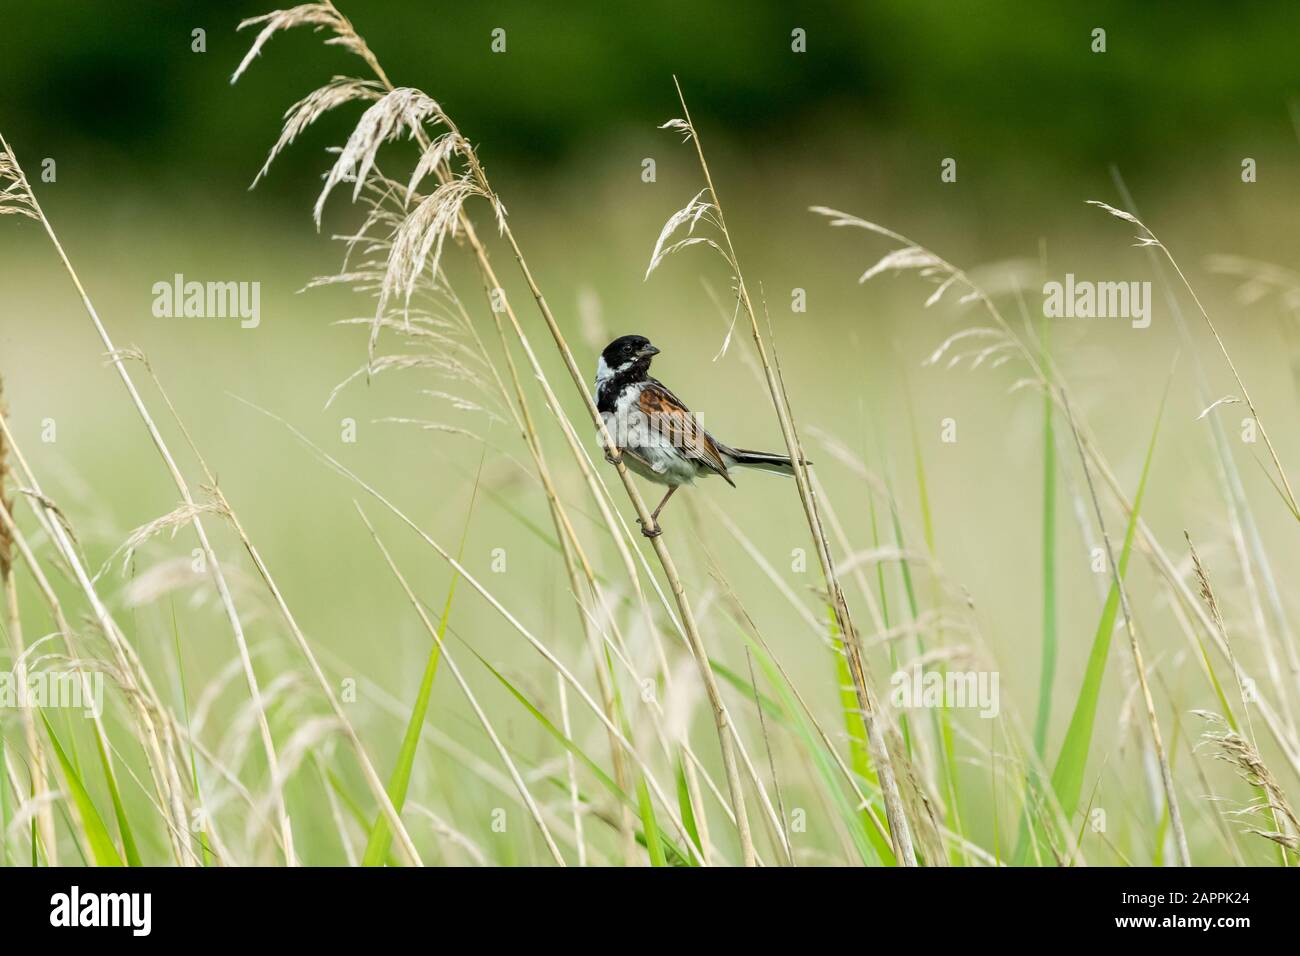 Male Reed bunting (Scientific name: Emberiza schoeniclus) perched on a grass stem in natural reed bed habitat. FAcing right. Landscape. Space for copy Stock Photo